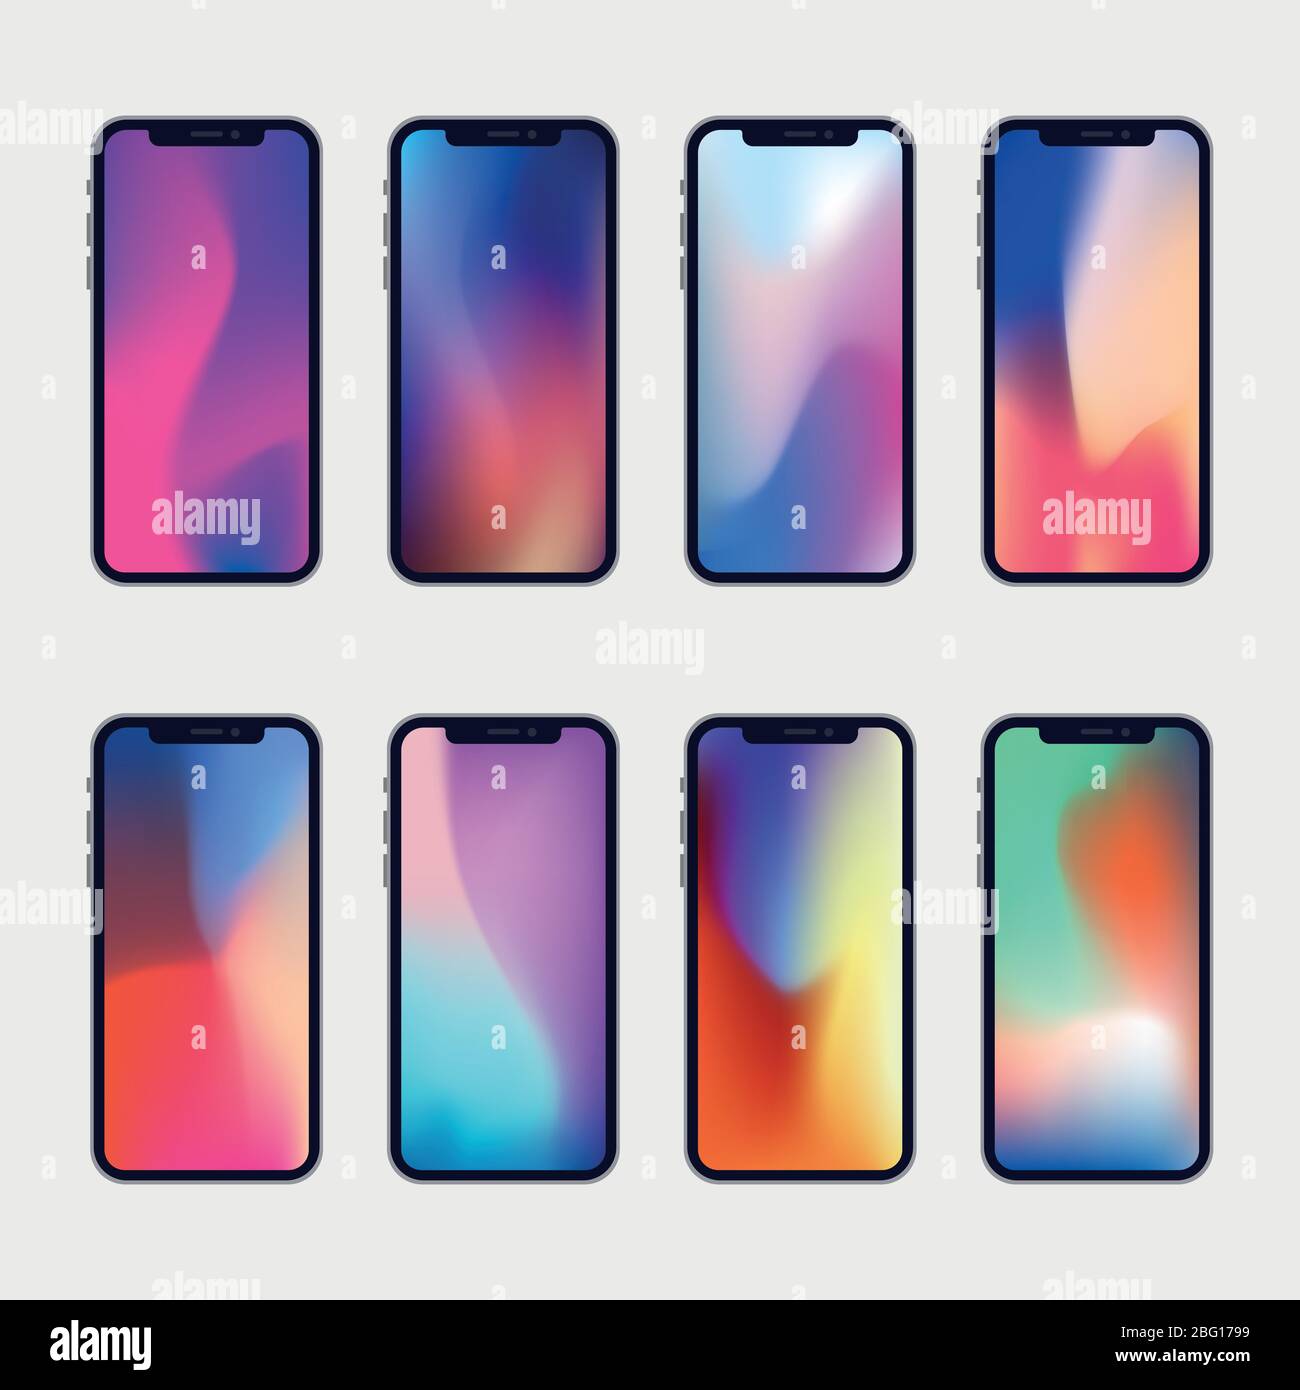 New generation phone with 8 modern wallpapers. Vector mockups collection. Smartphone screensaver wallpaper colored background illustration Stock Vector